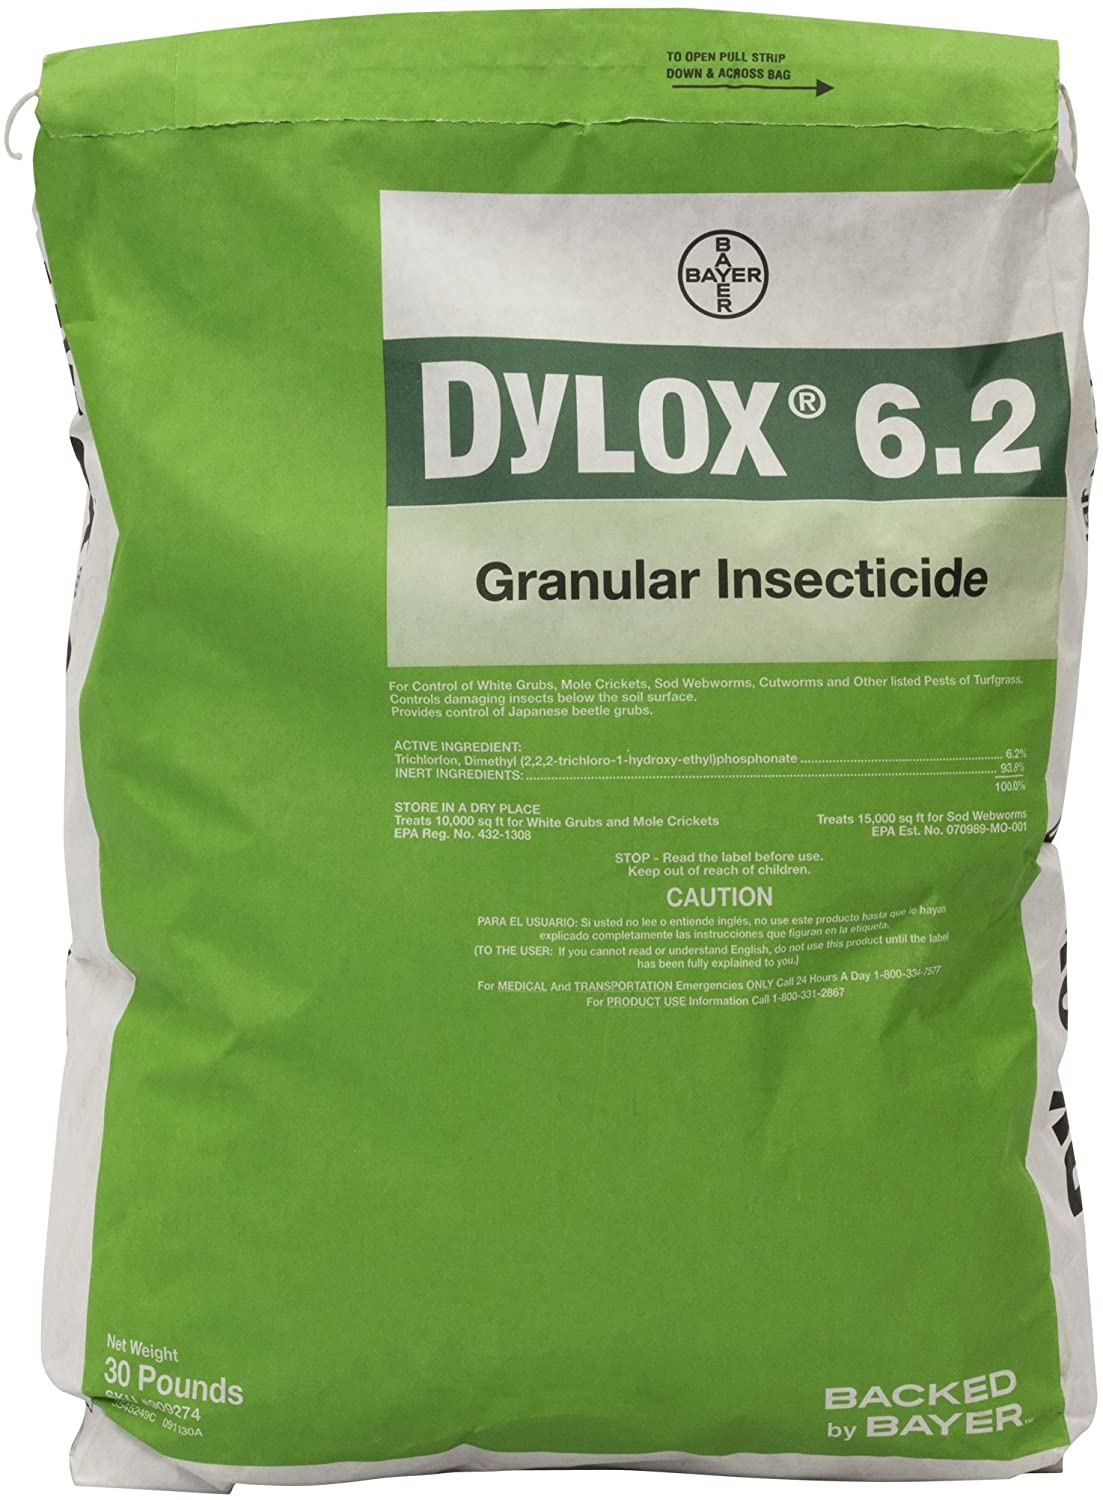 Bayer Dylox Granular Insecticide